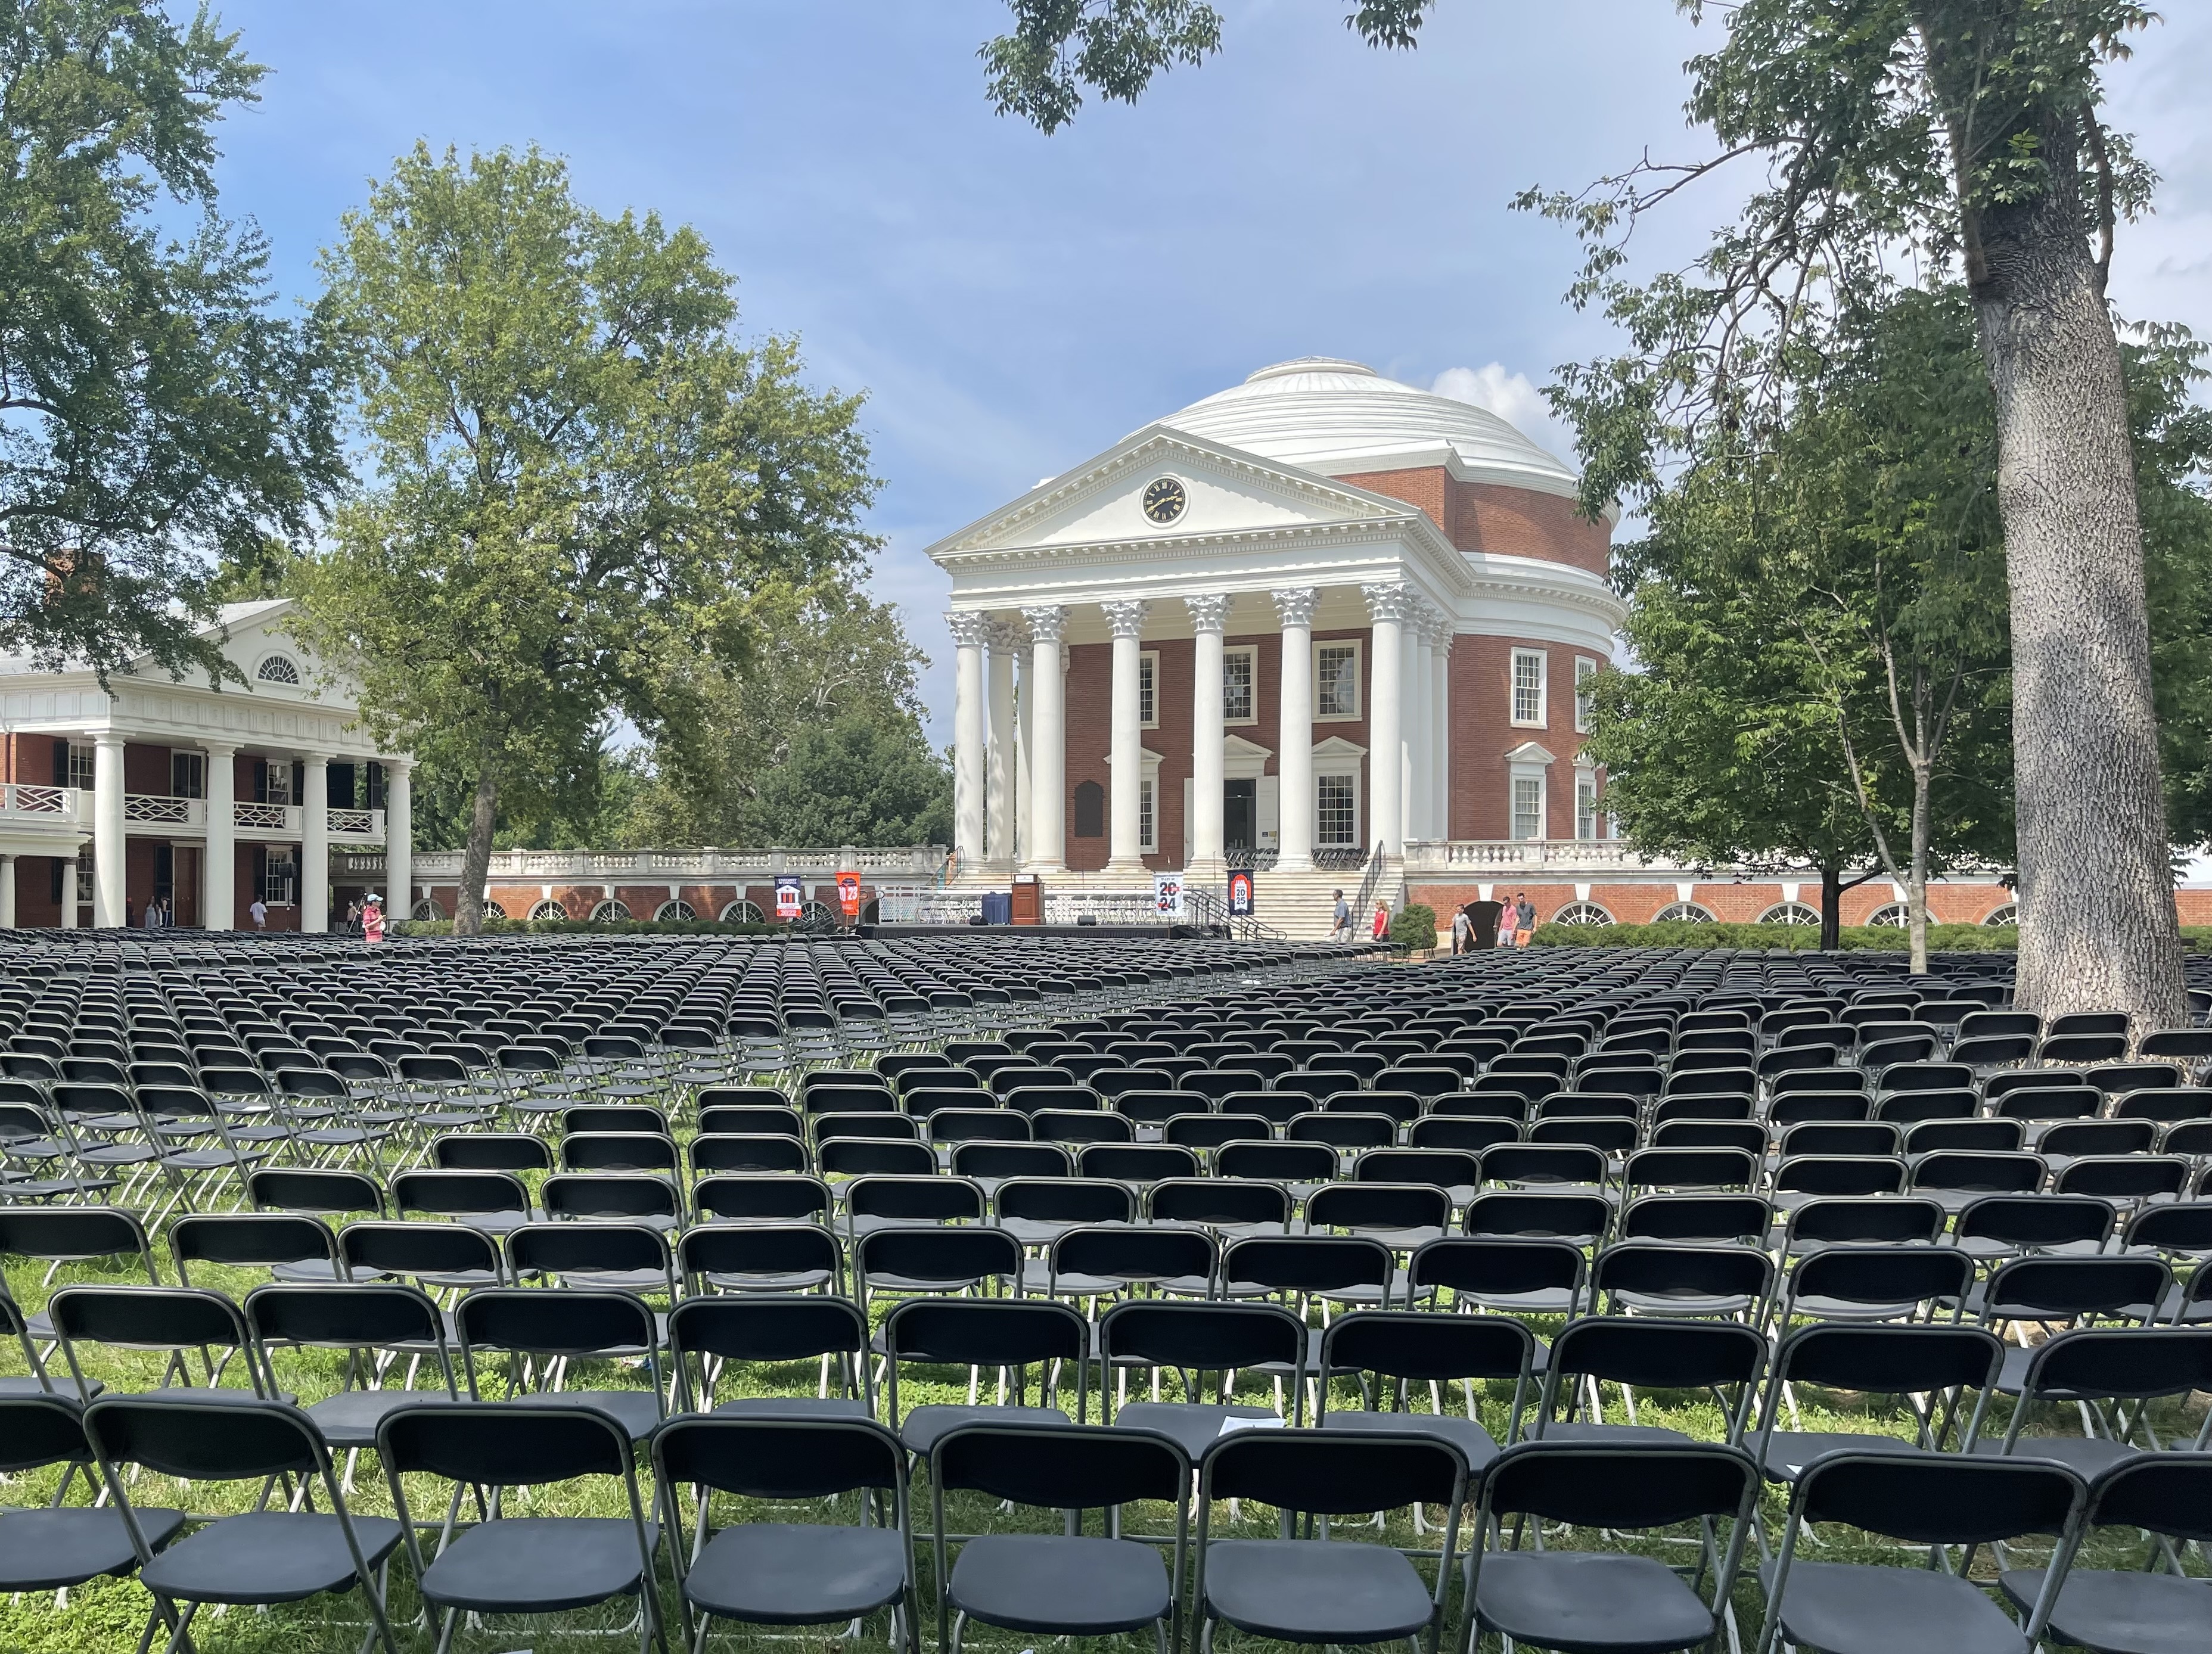 rows of chairs neatly arranged in front of the Rotunda for Opening Convocation